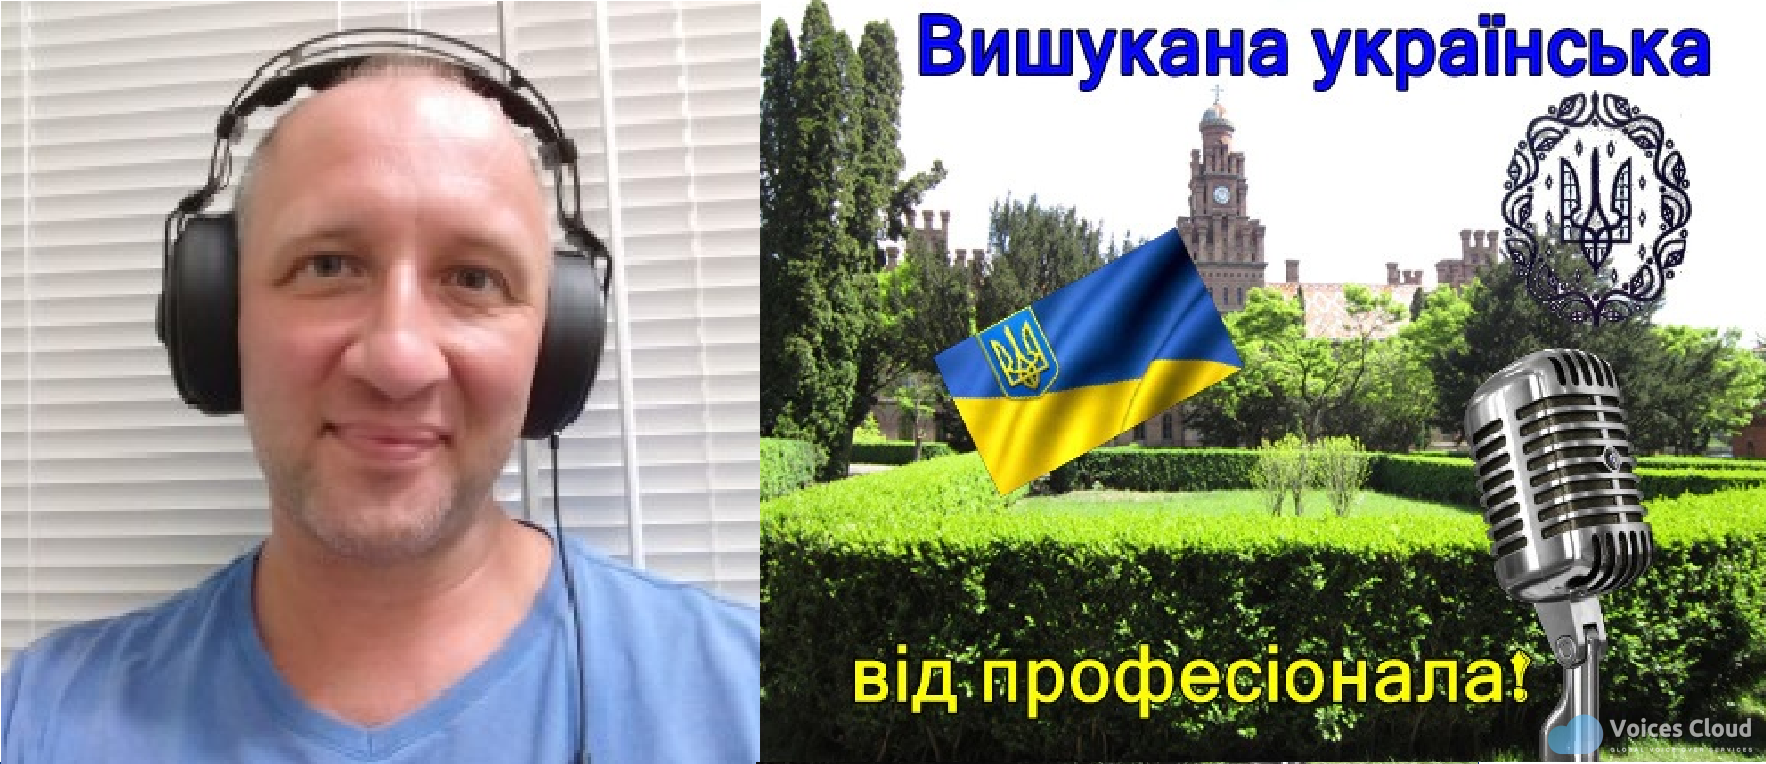 15231Ukrainian VO from the experienced native (10+ yrs in business)